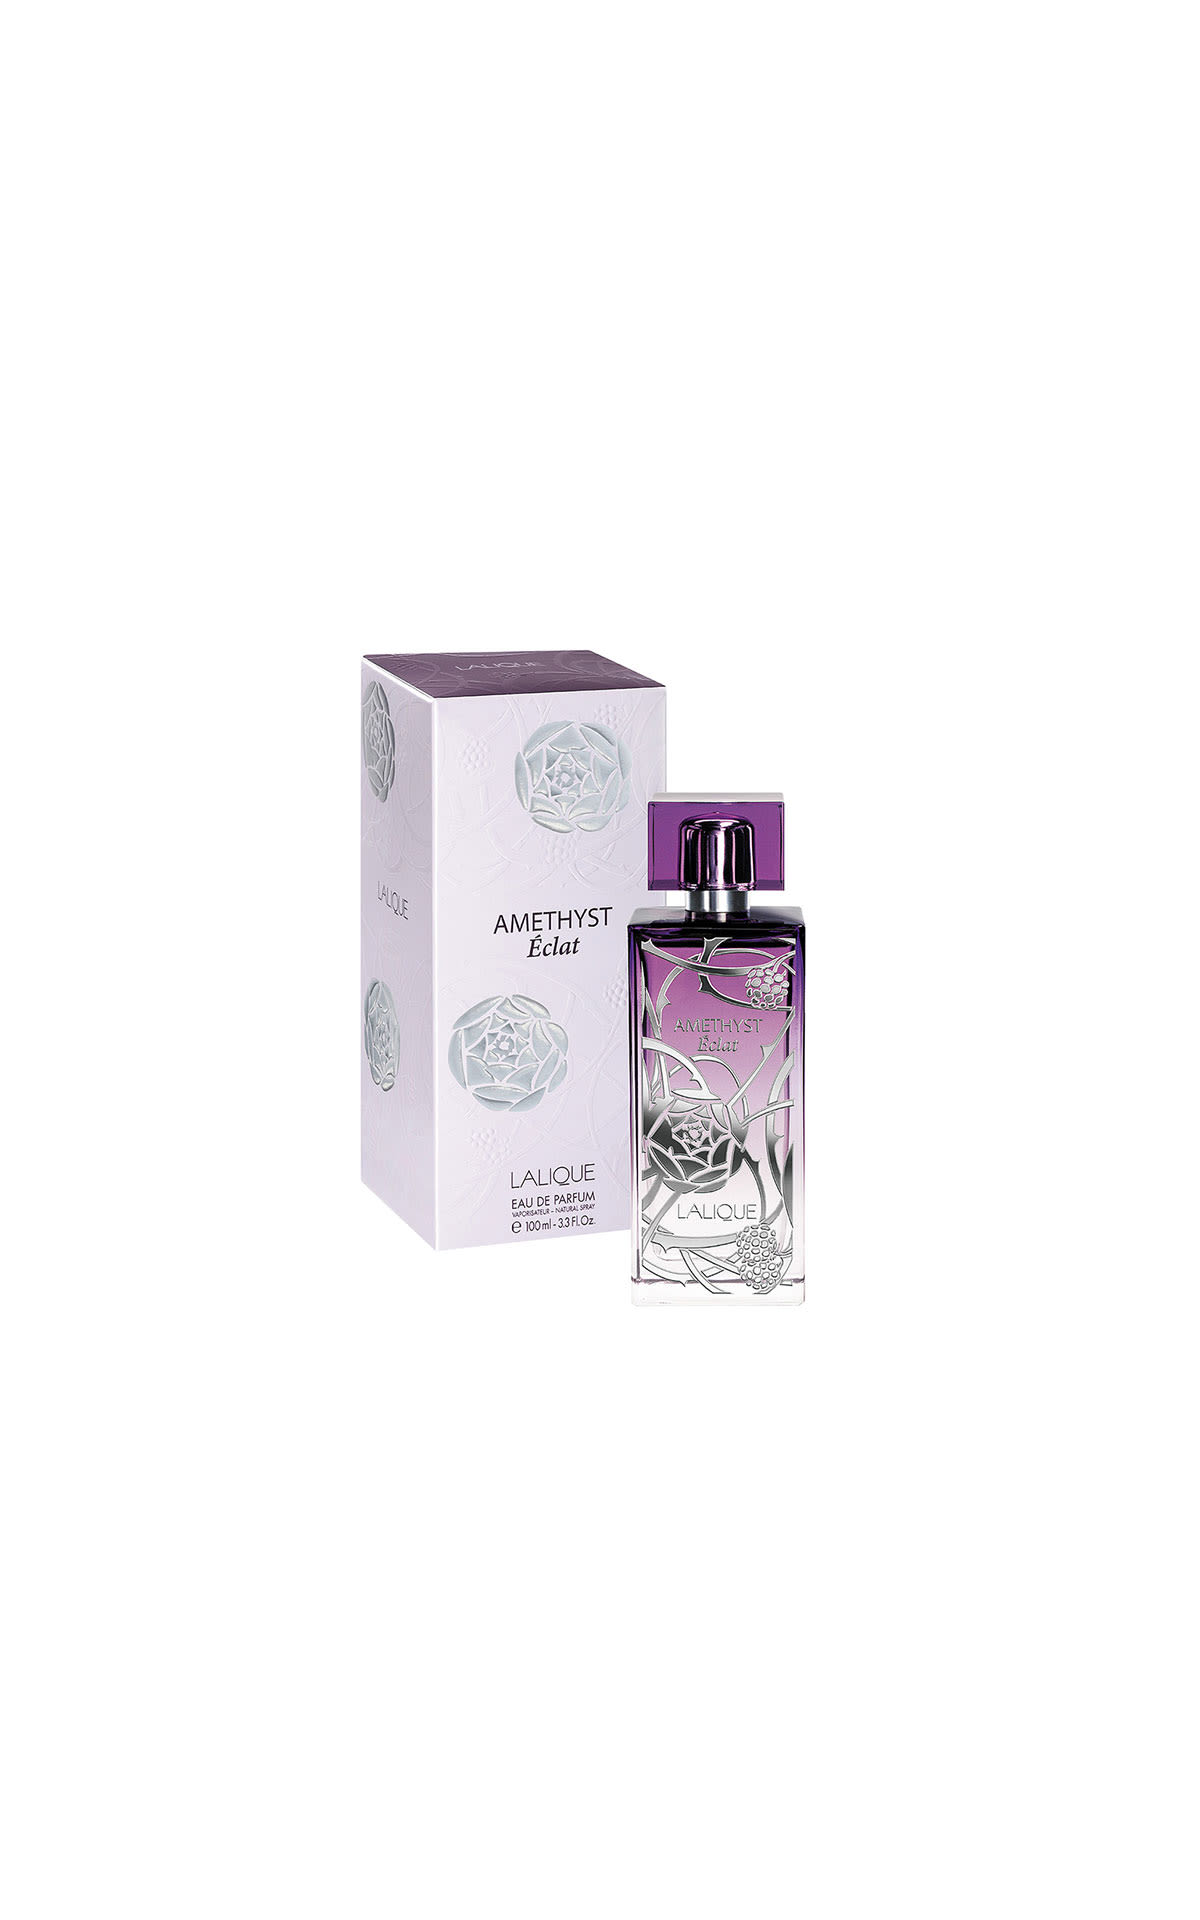 Lalique Amethyst eclat EDP 100ml  from Bicester Village